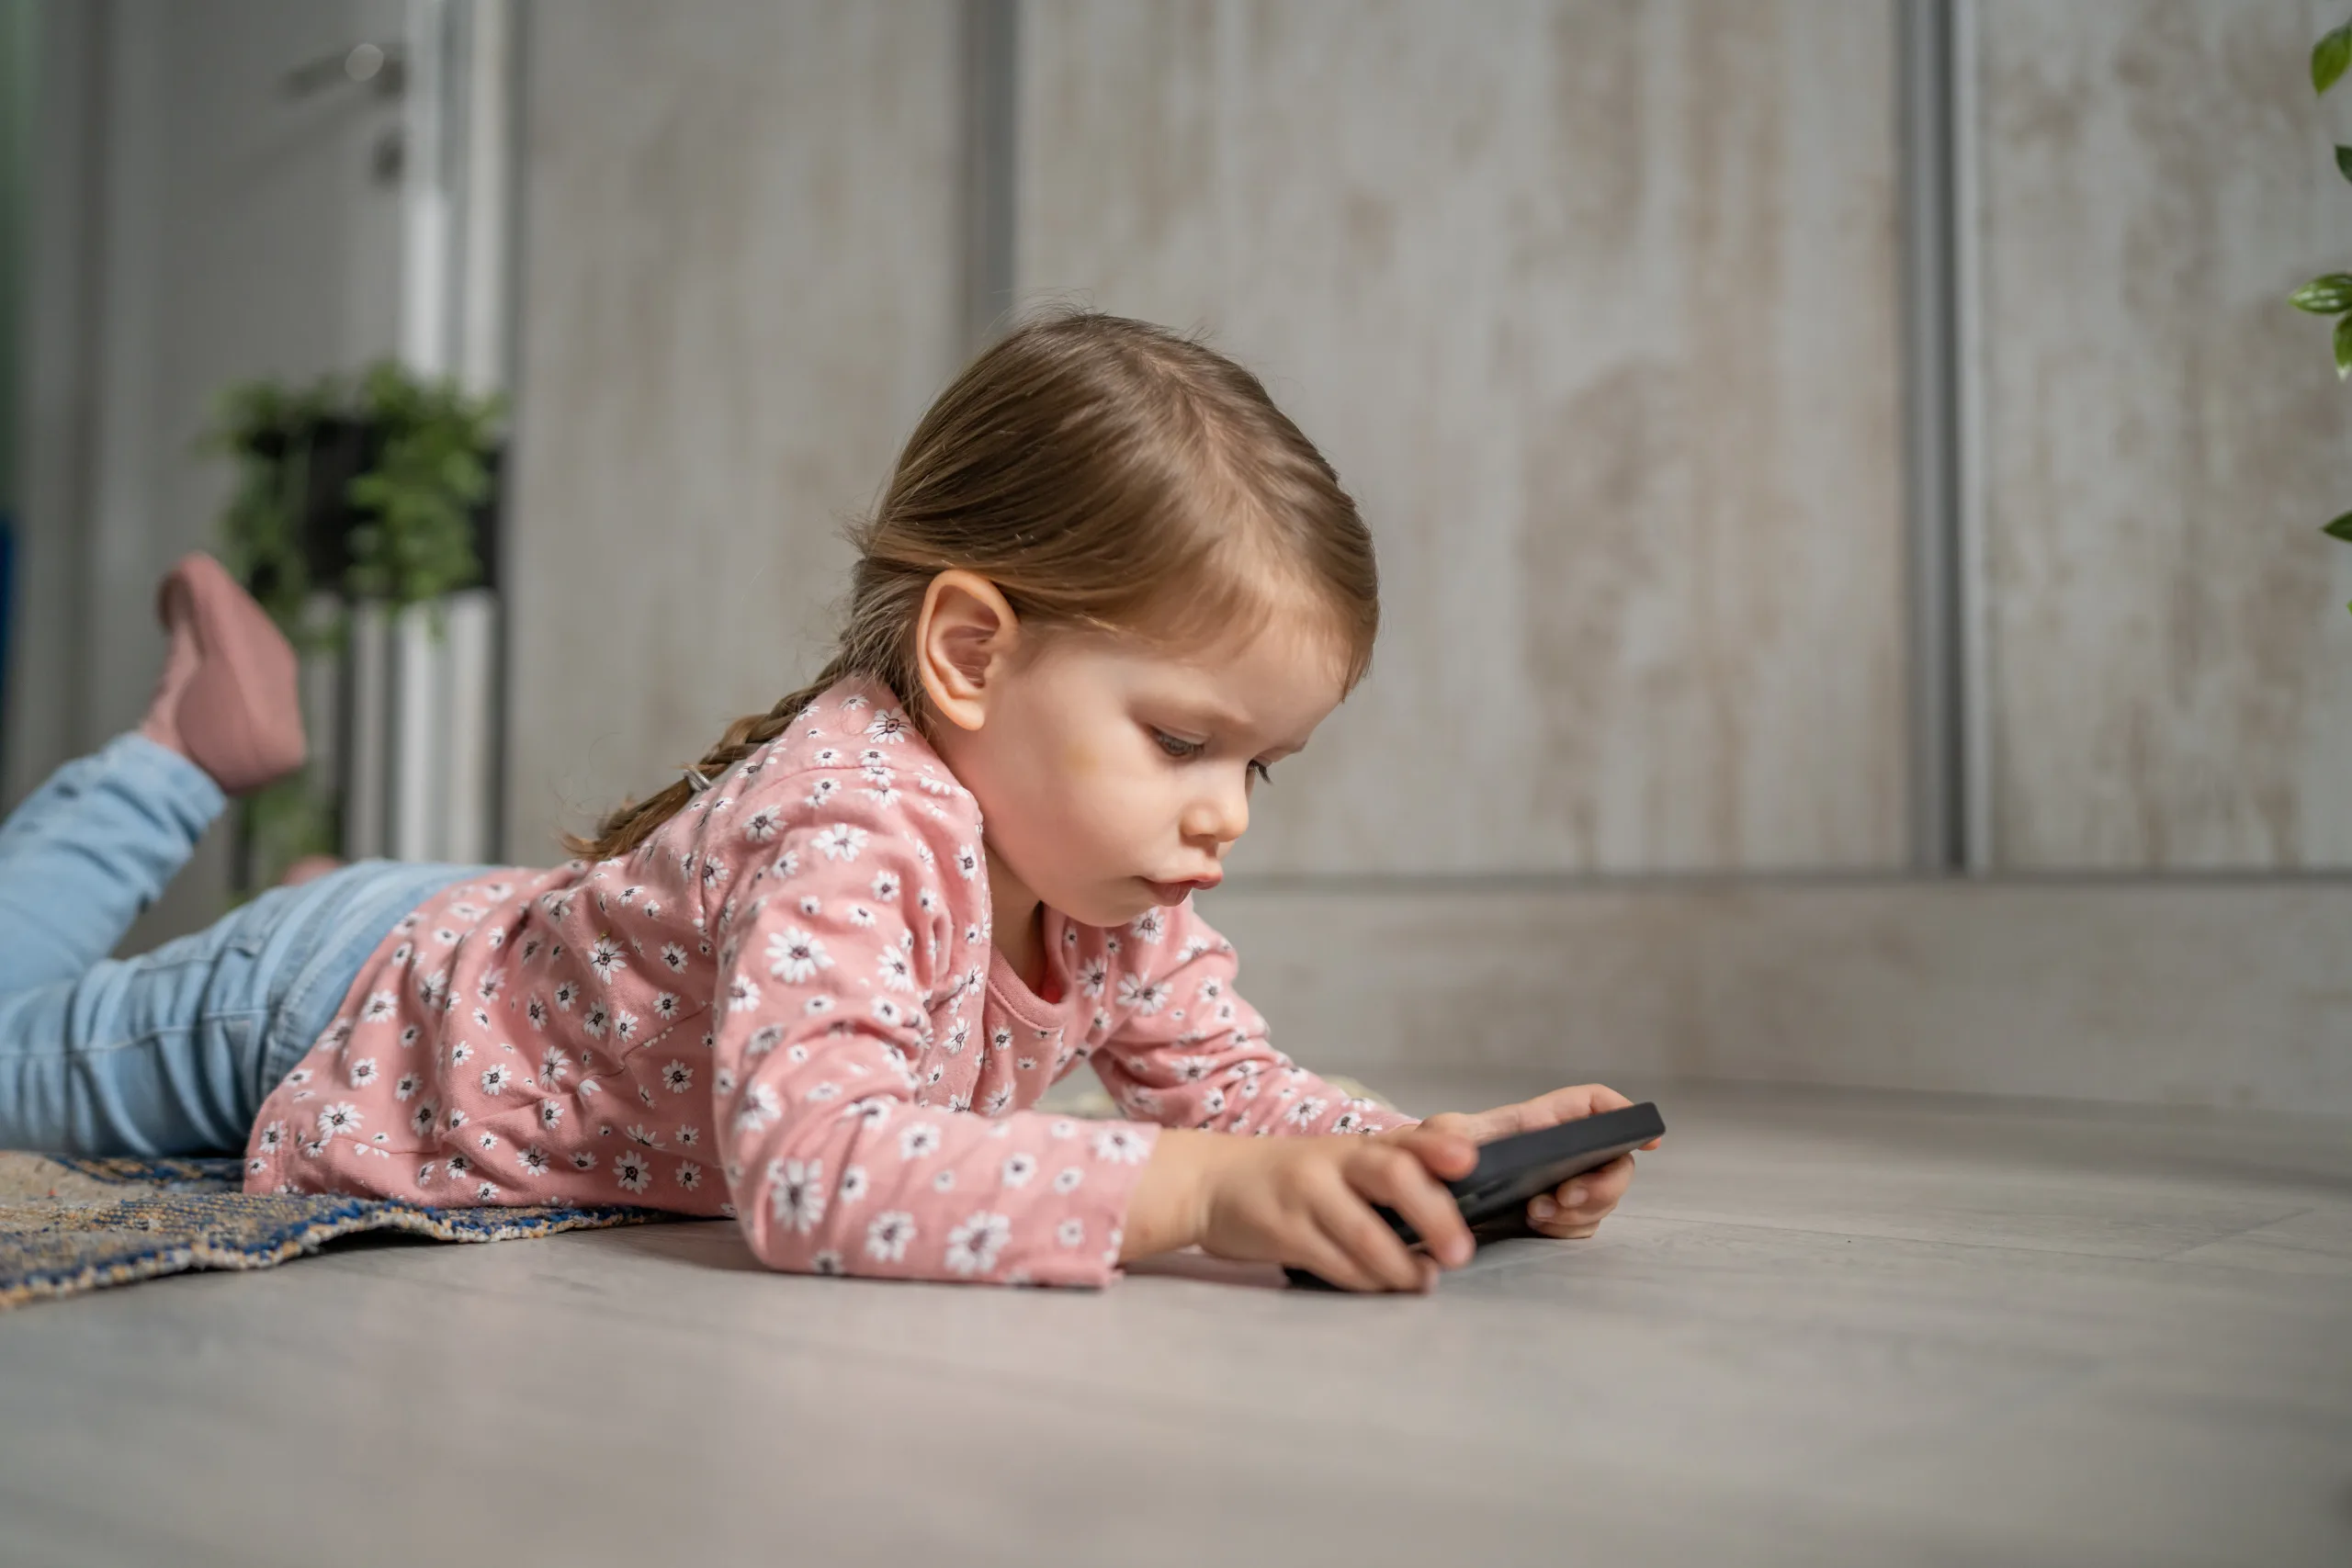 Screens and children: rules and strategies for a balanced use in everyday life